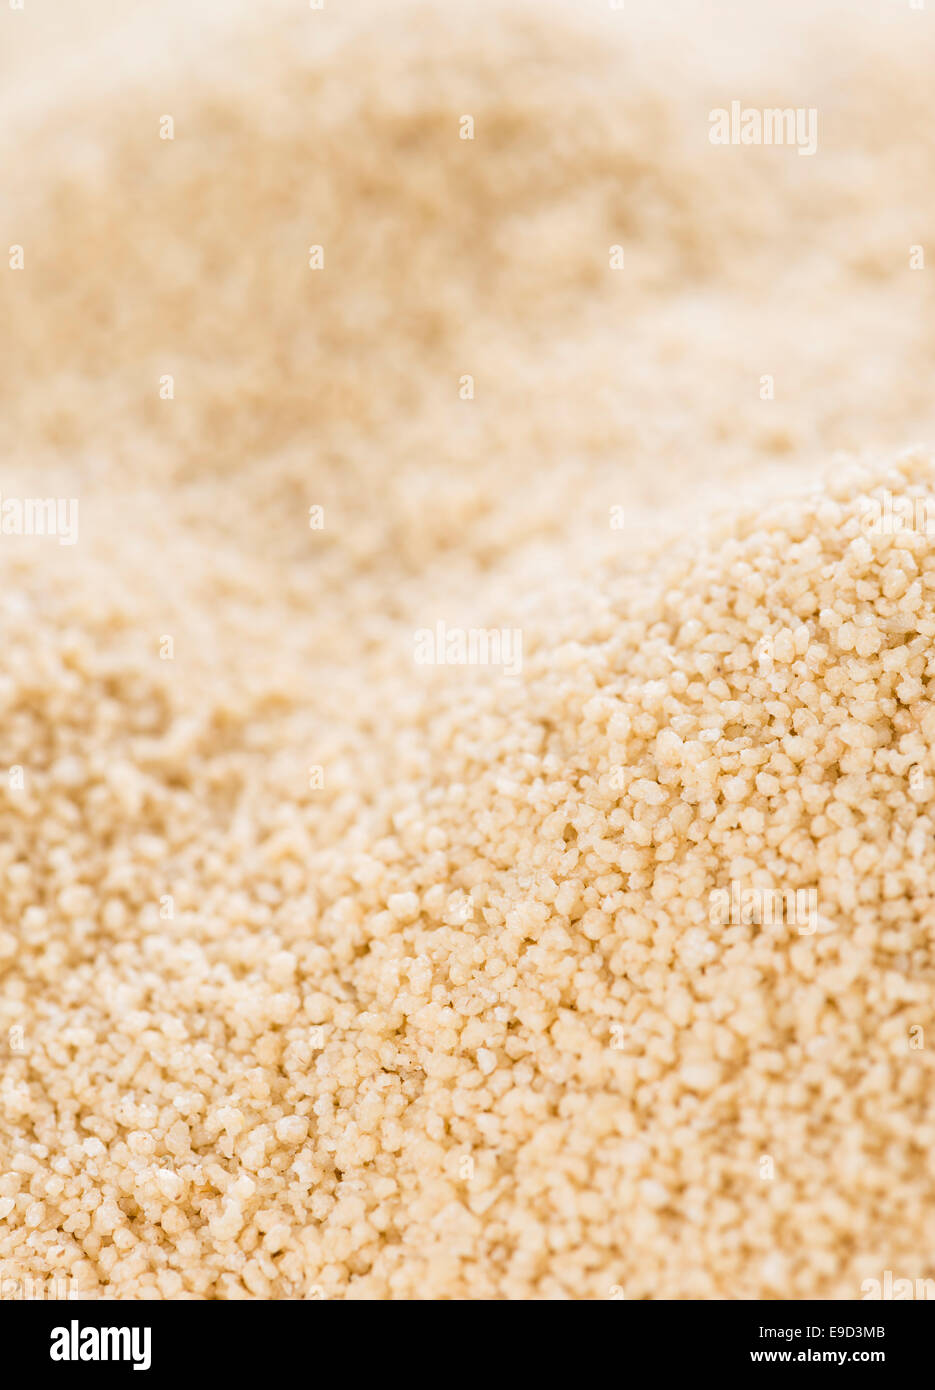 Portion of Couscous (close-up shot) for use as background image or as texture Stock Photo